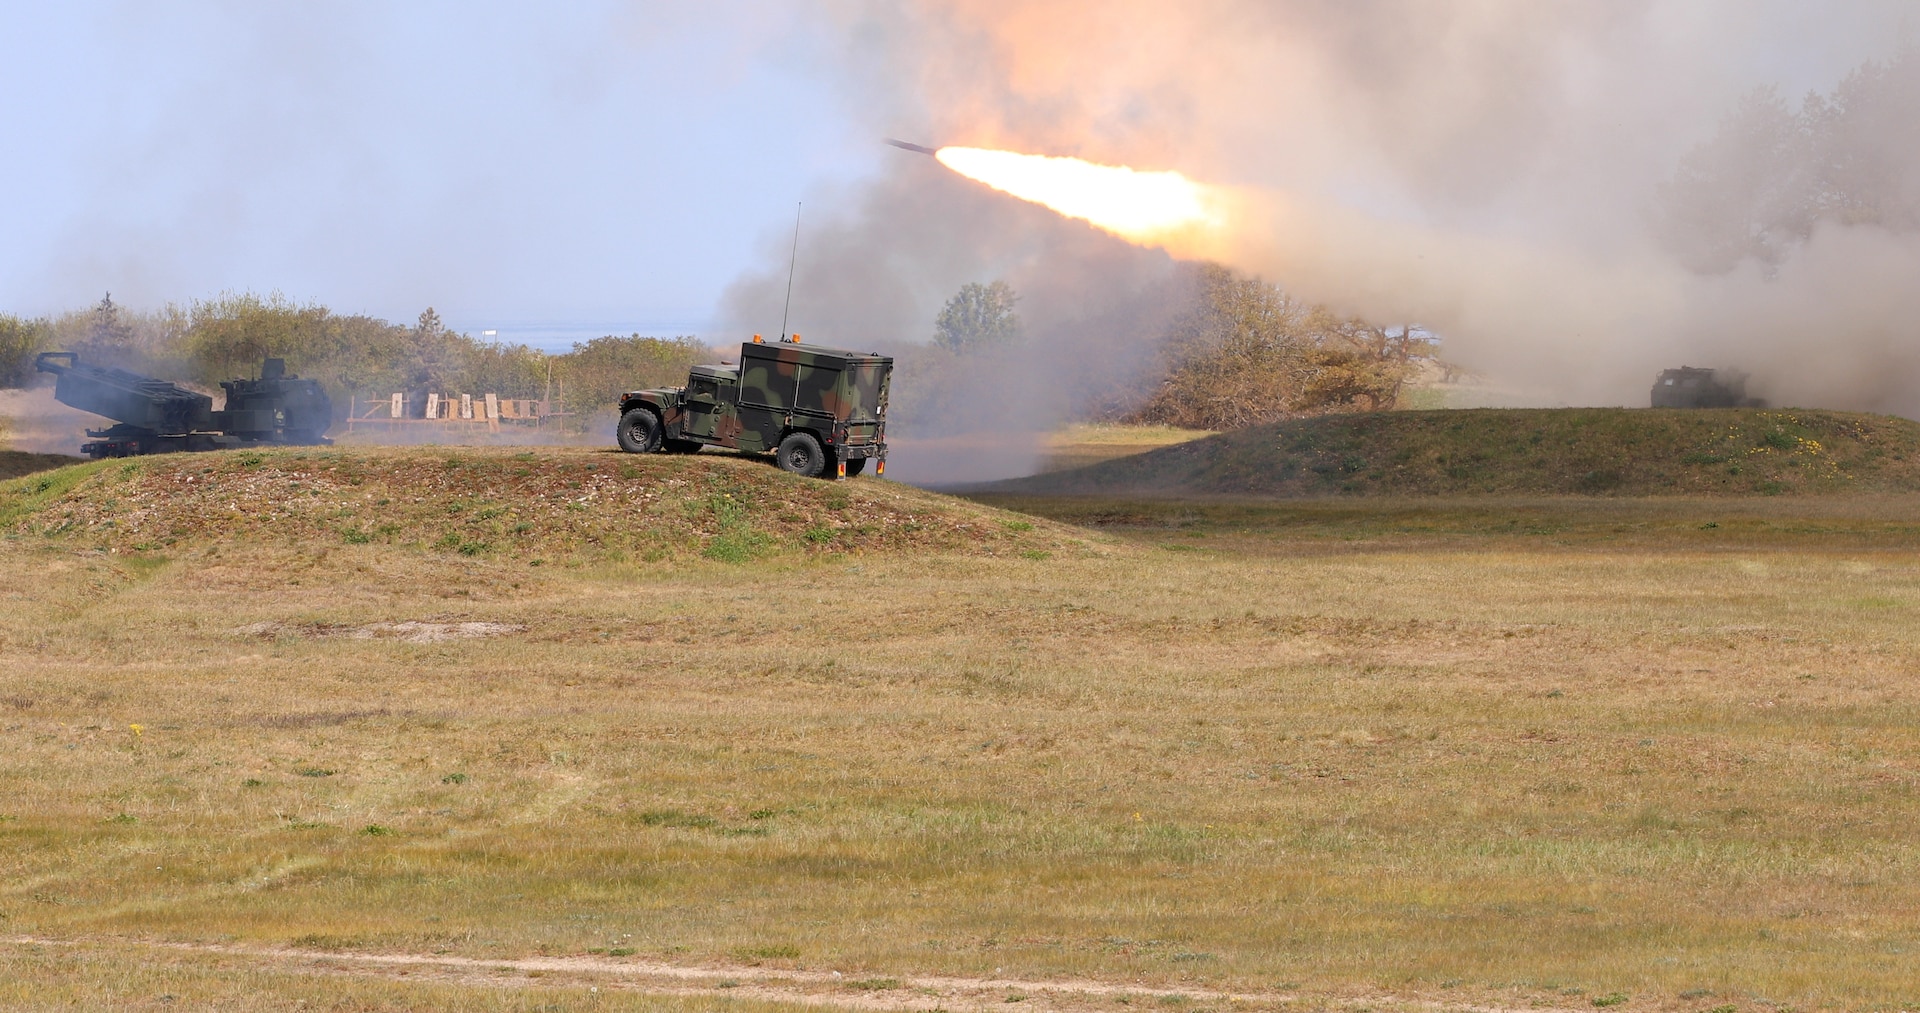 U.S. Army crew with the 1-182nd Field Artillery Regiment Michigan National Guard, fire a rocket with the M142 High Mobility Artillery Rocket System into the Baltic Sea at Skede, Latvia, May 13, 2023. The Soldiers participated in a live fire event in support of the Defender 23 exercise to build readiness and interoperability between U.S., NATO allies and partners.